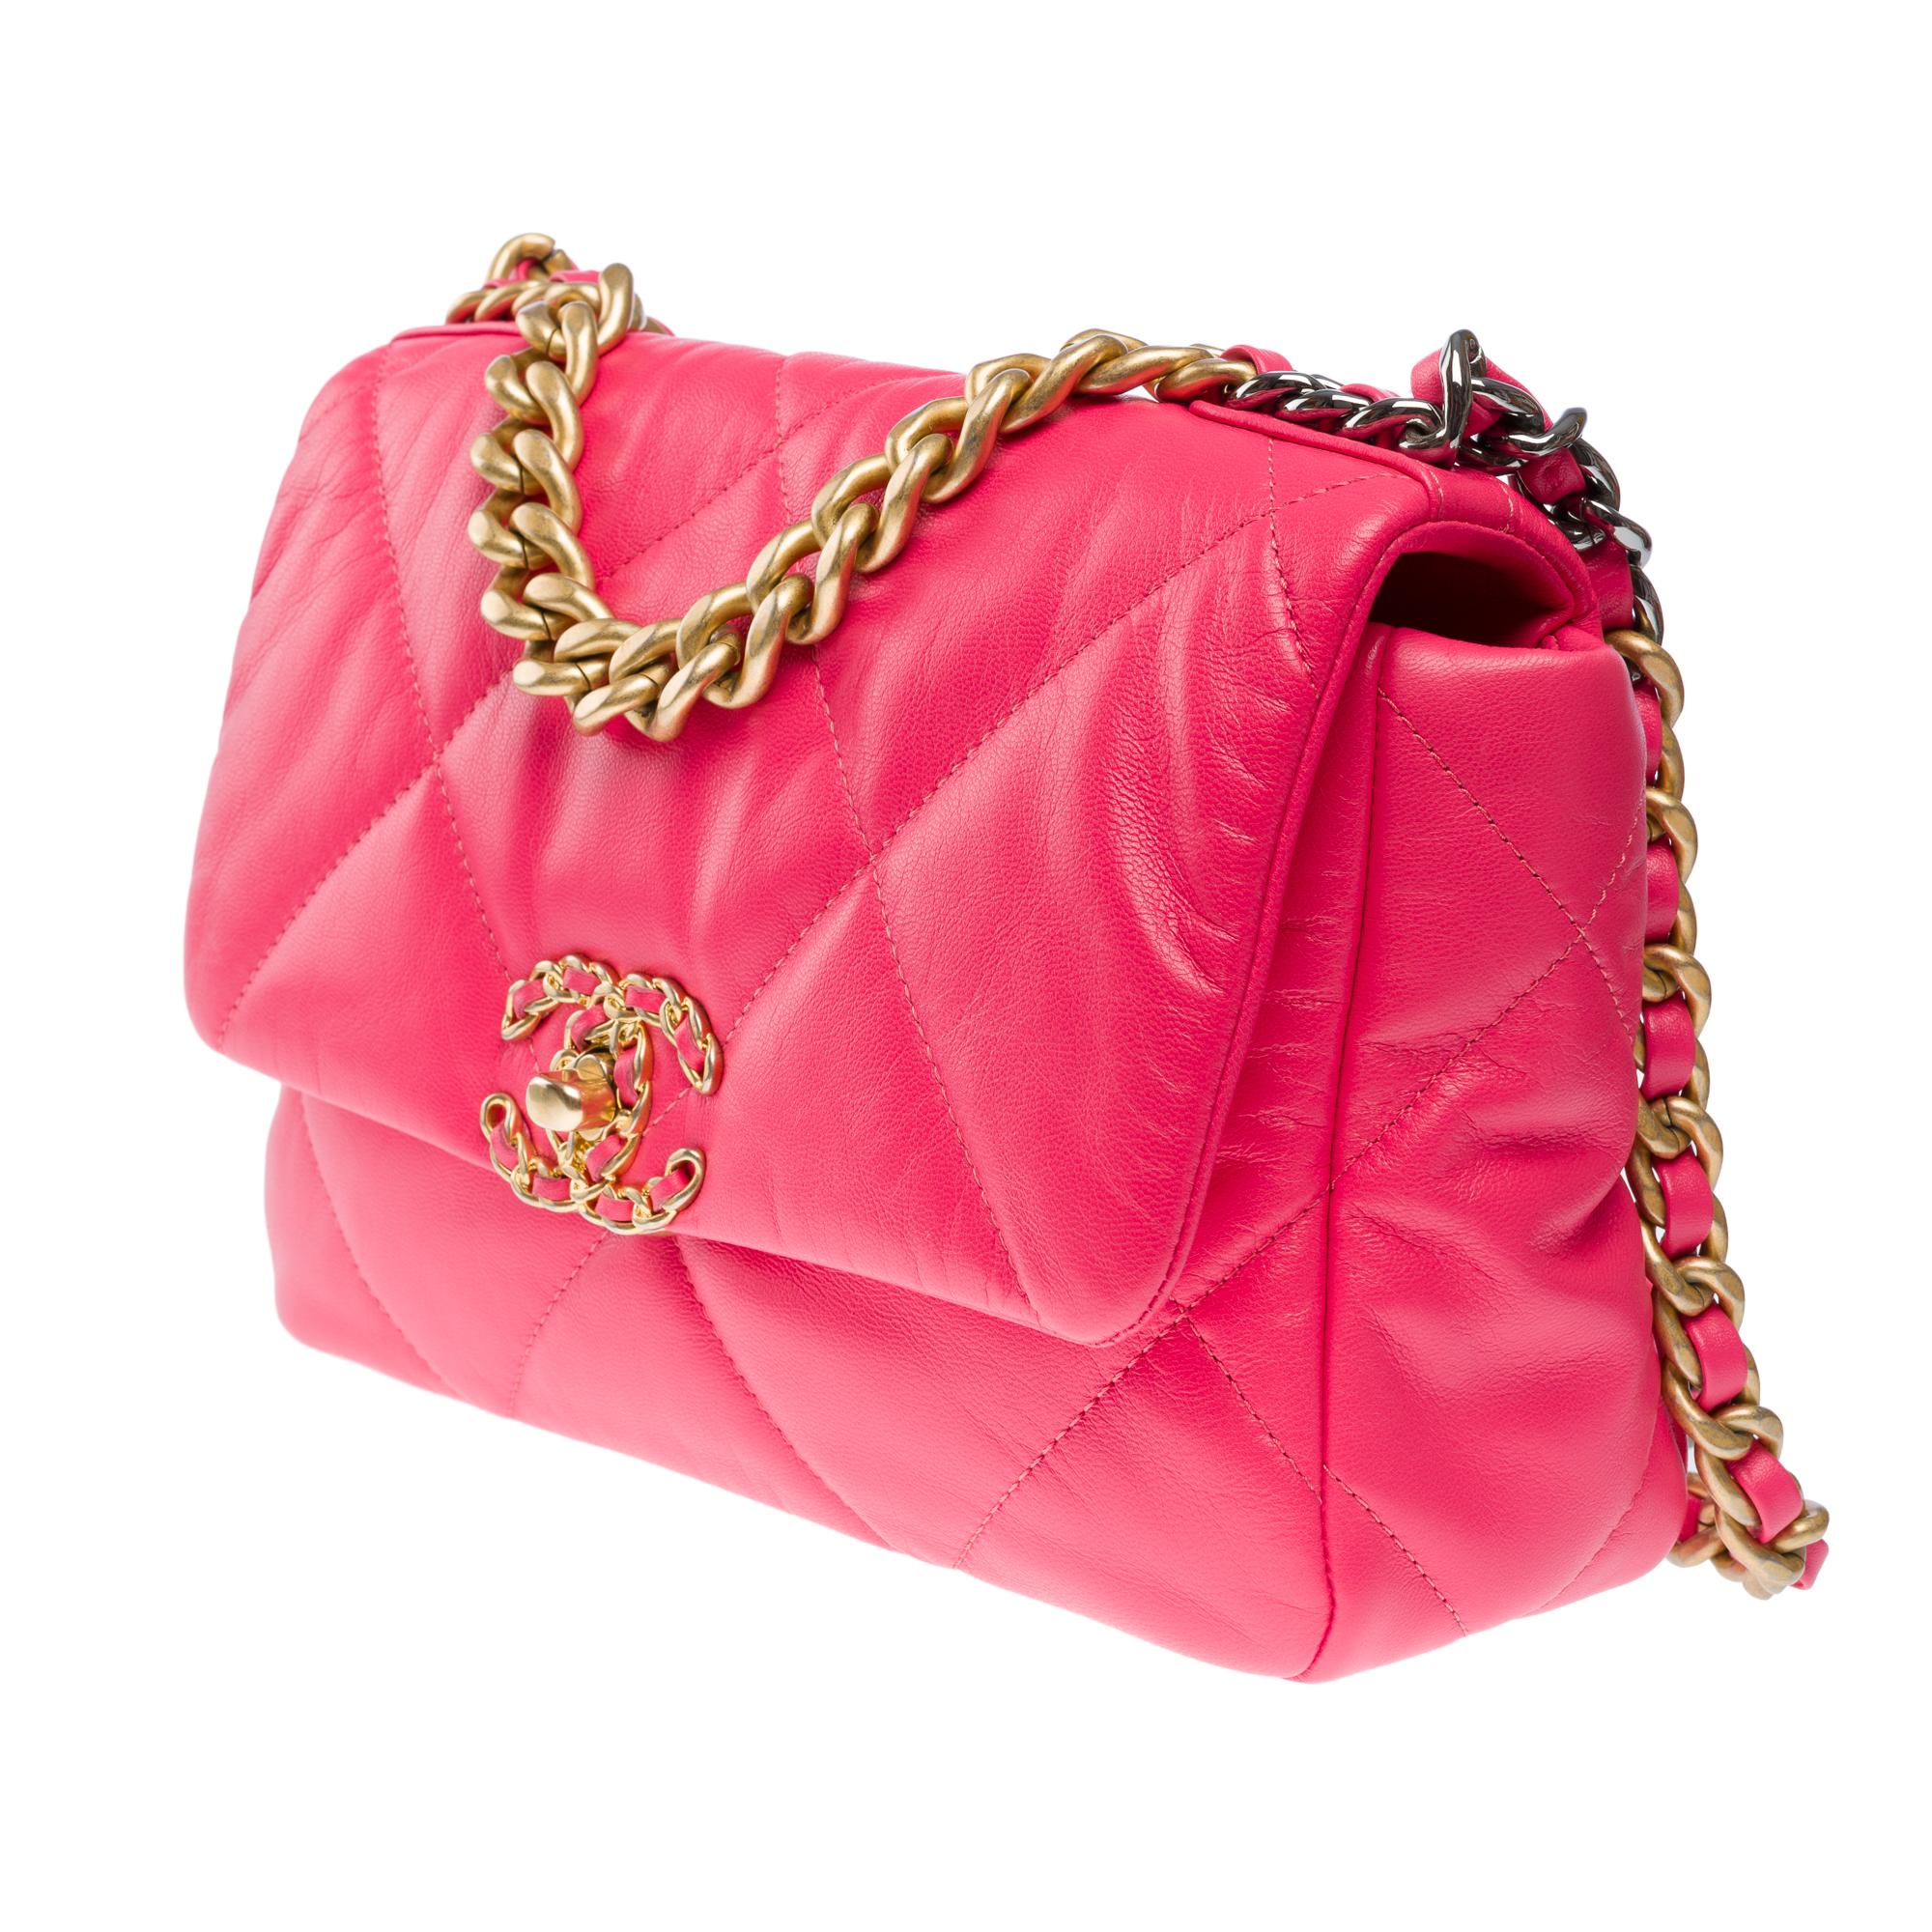 Stunning Chanel 19 shoulder bag in Pink quilted leather , Matt gold and SHW For Sale 2